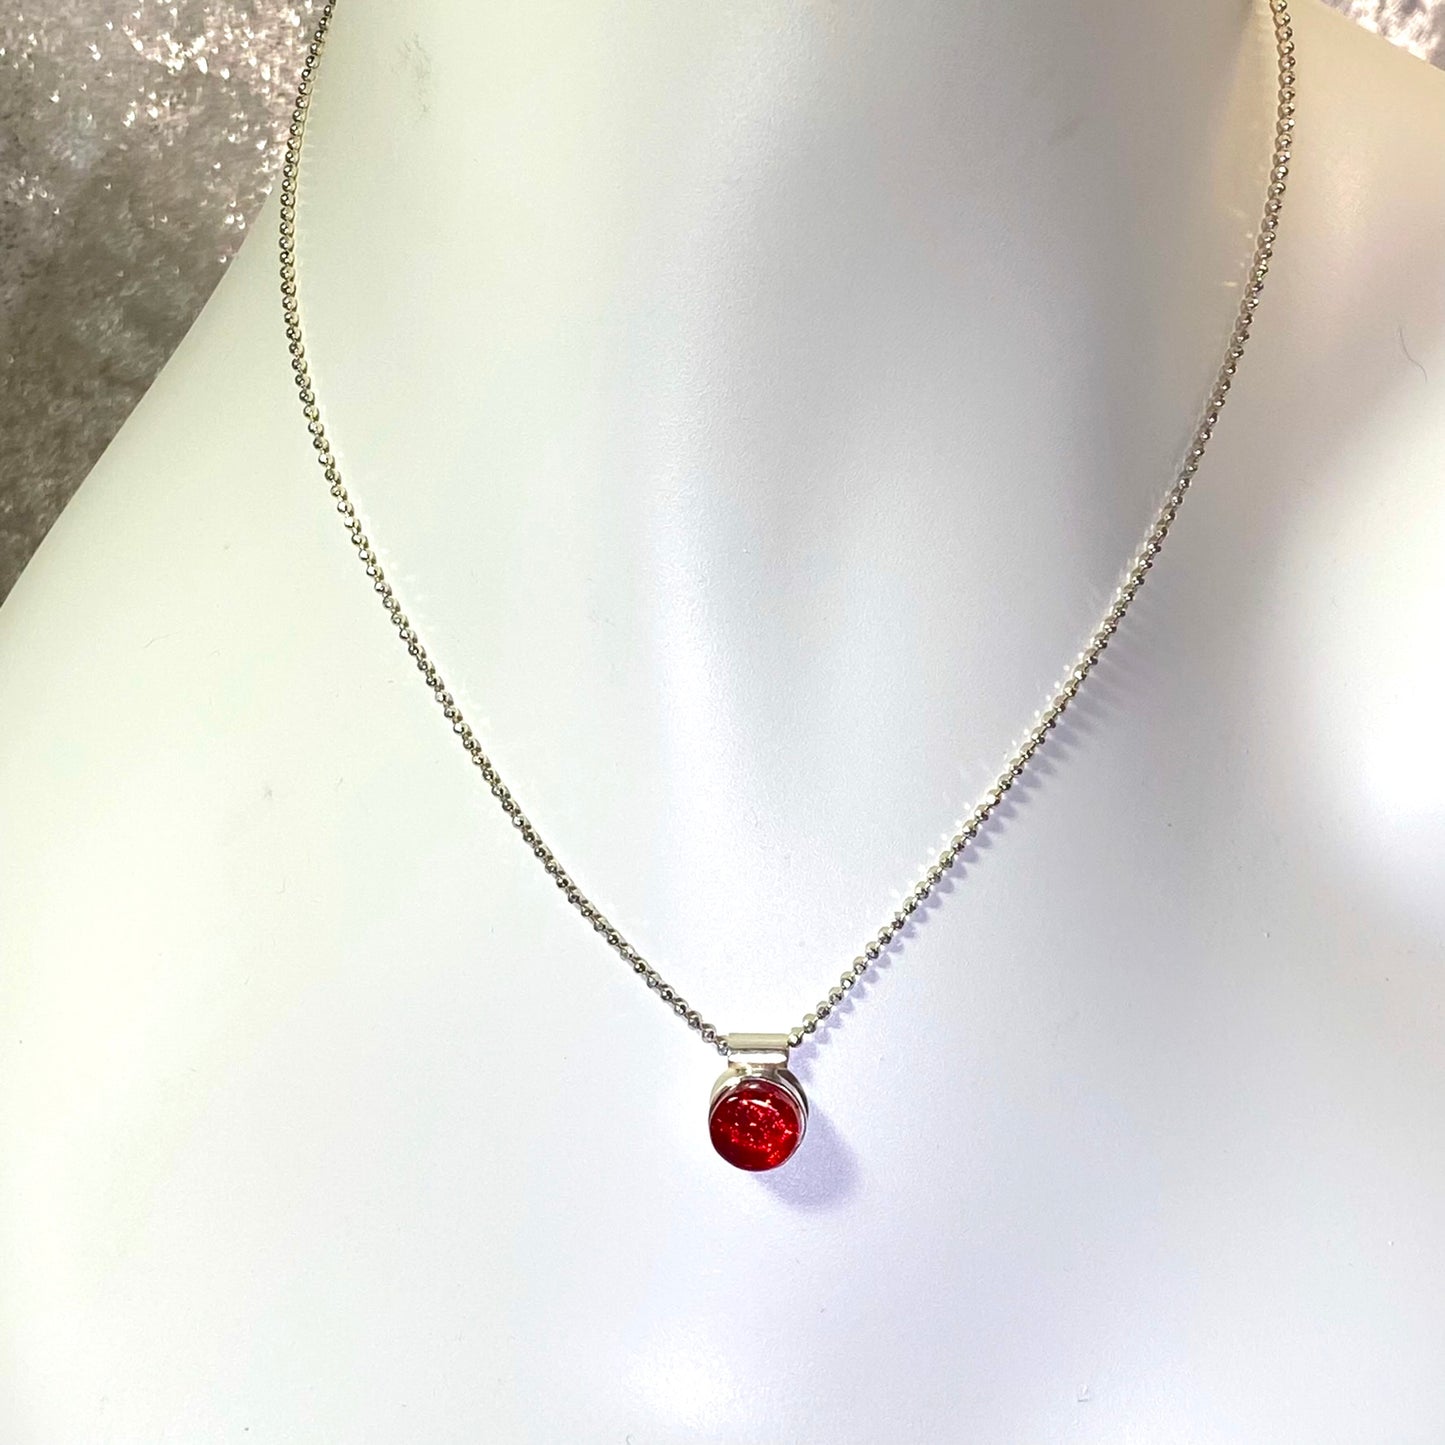 Circle cherry red small necklace, glass jewelry, glass and silver jewelry, handmade, handcrafted, American Craft, hand fabricated jewelry, hand fabricated jewellery, Athen, Georgia, colorful jewelry, sparkle, bullseye glass, dichroic glass, art jewelry